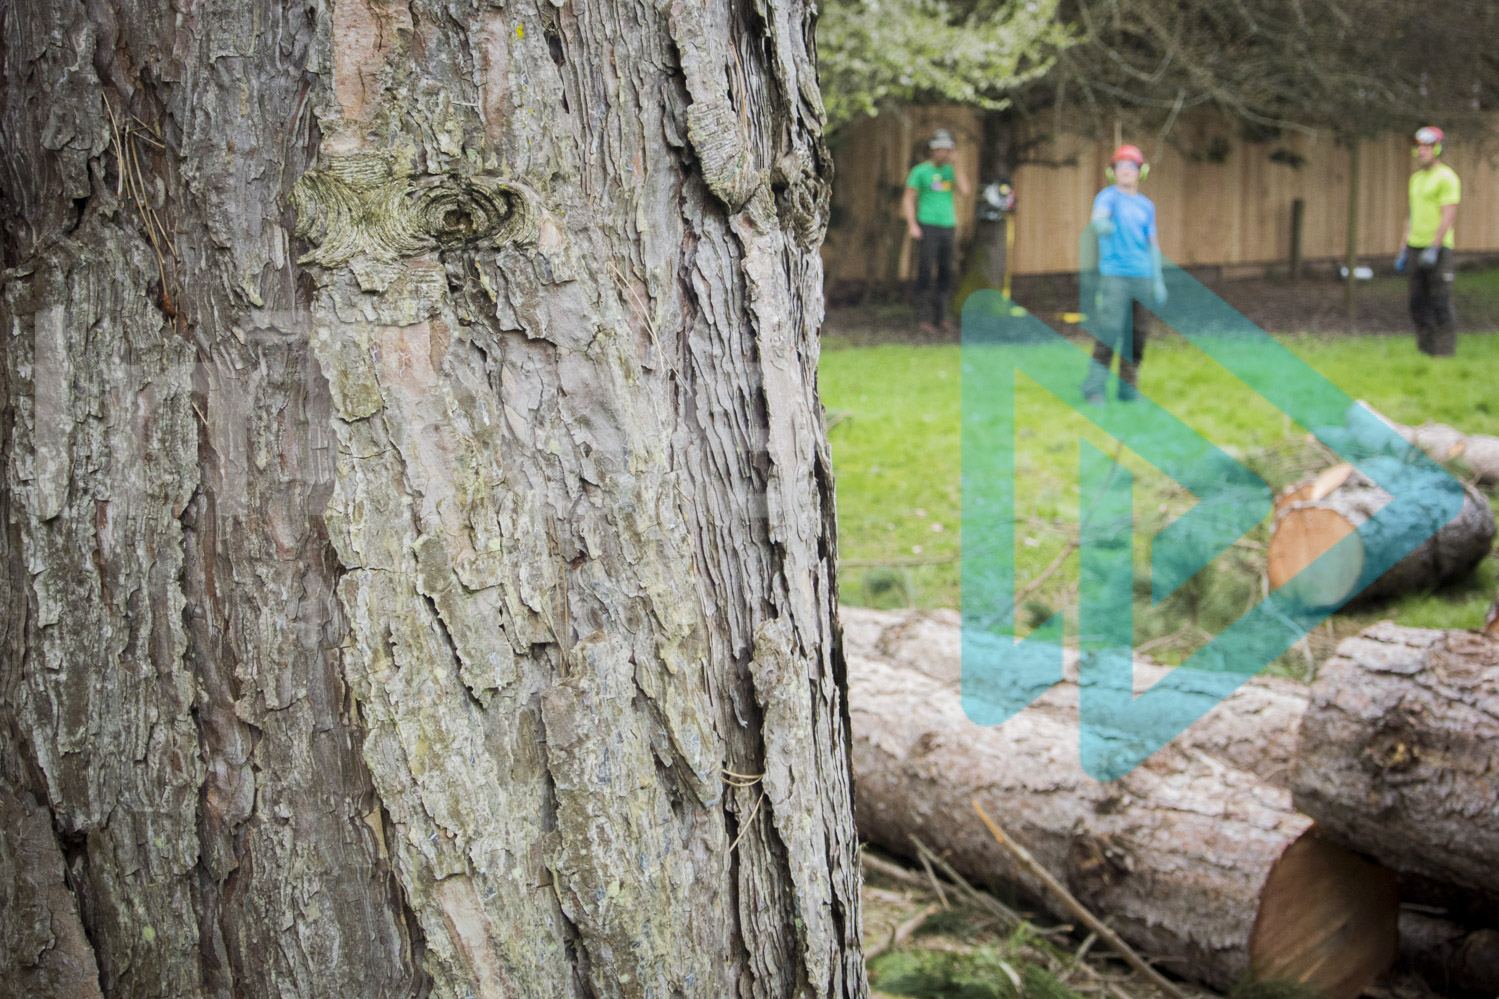 Base-of-tree-with-arborists-blurred-in-backgroound-InTree-arborist-image-001-9919